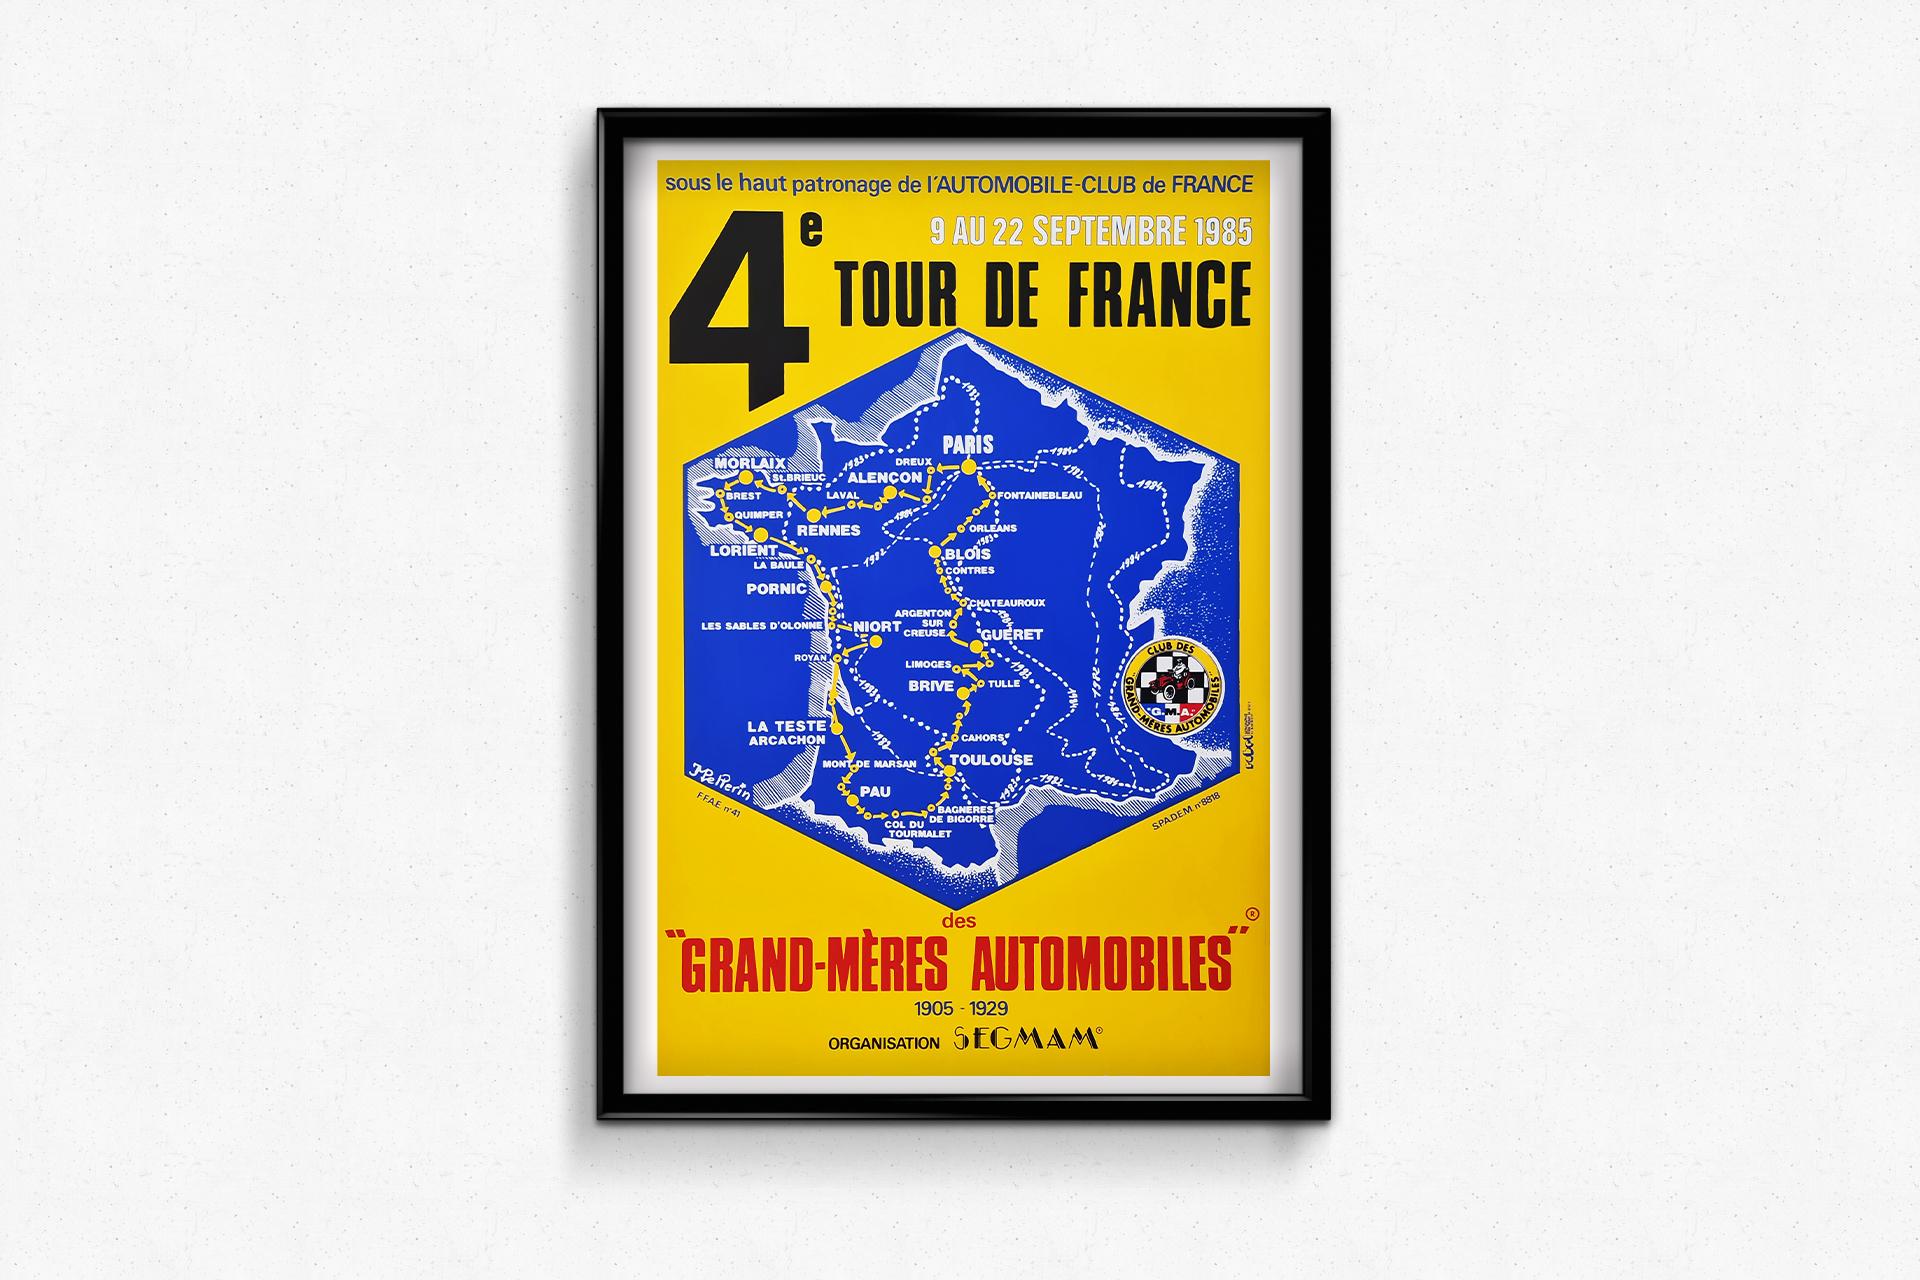 The purpose of the poster was to promote the 4th Tour de France of the 